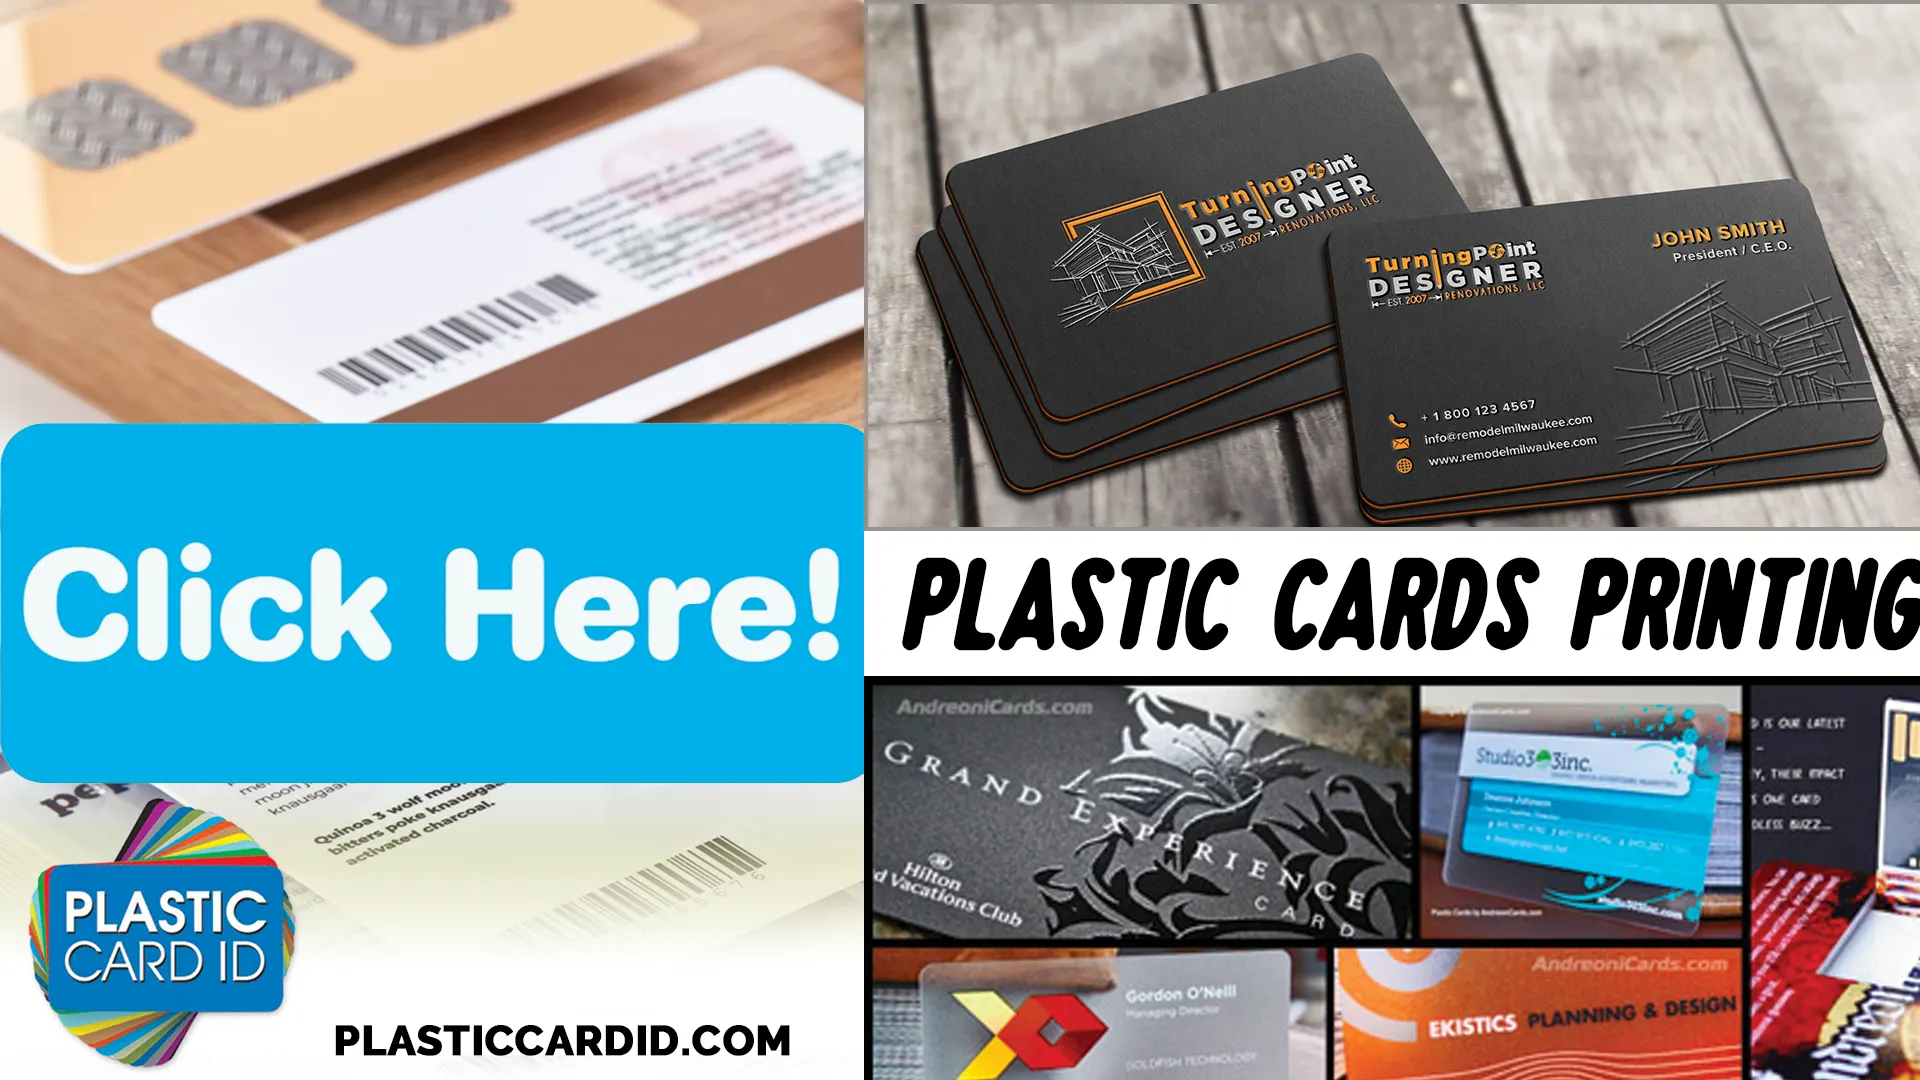 Welcome to the World of Professional Plastic Cards at Plastic Card ID




